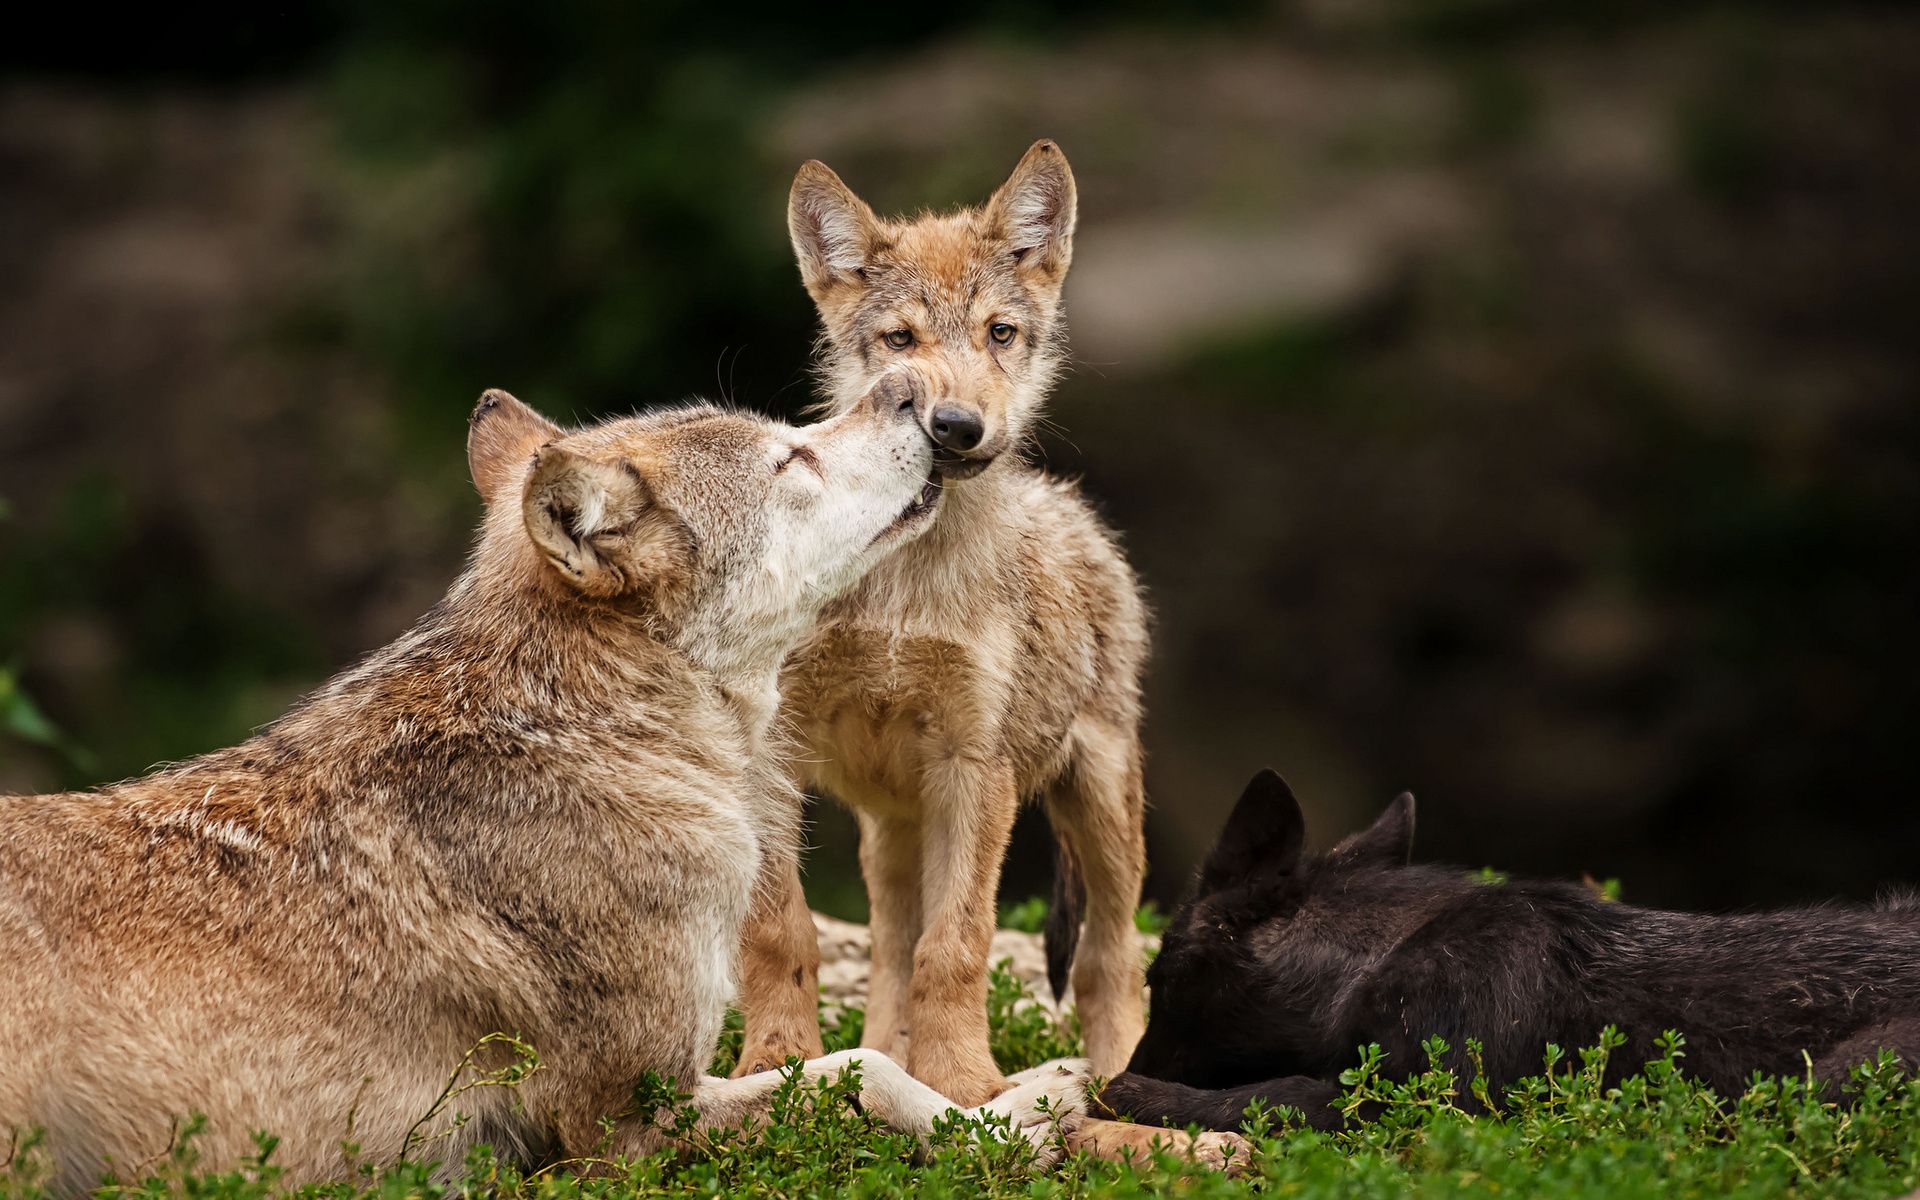 Animals wolf wolves wildlife predators babies cubs mother mom love cute face eyes stare look fur whiskers wallpaperx1200